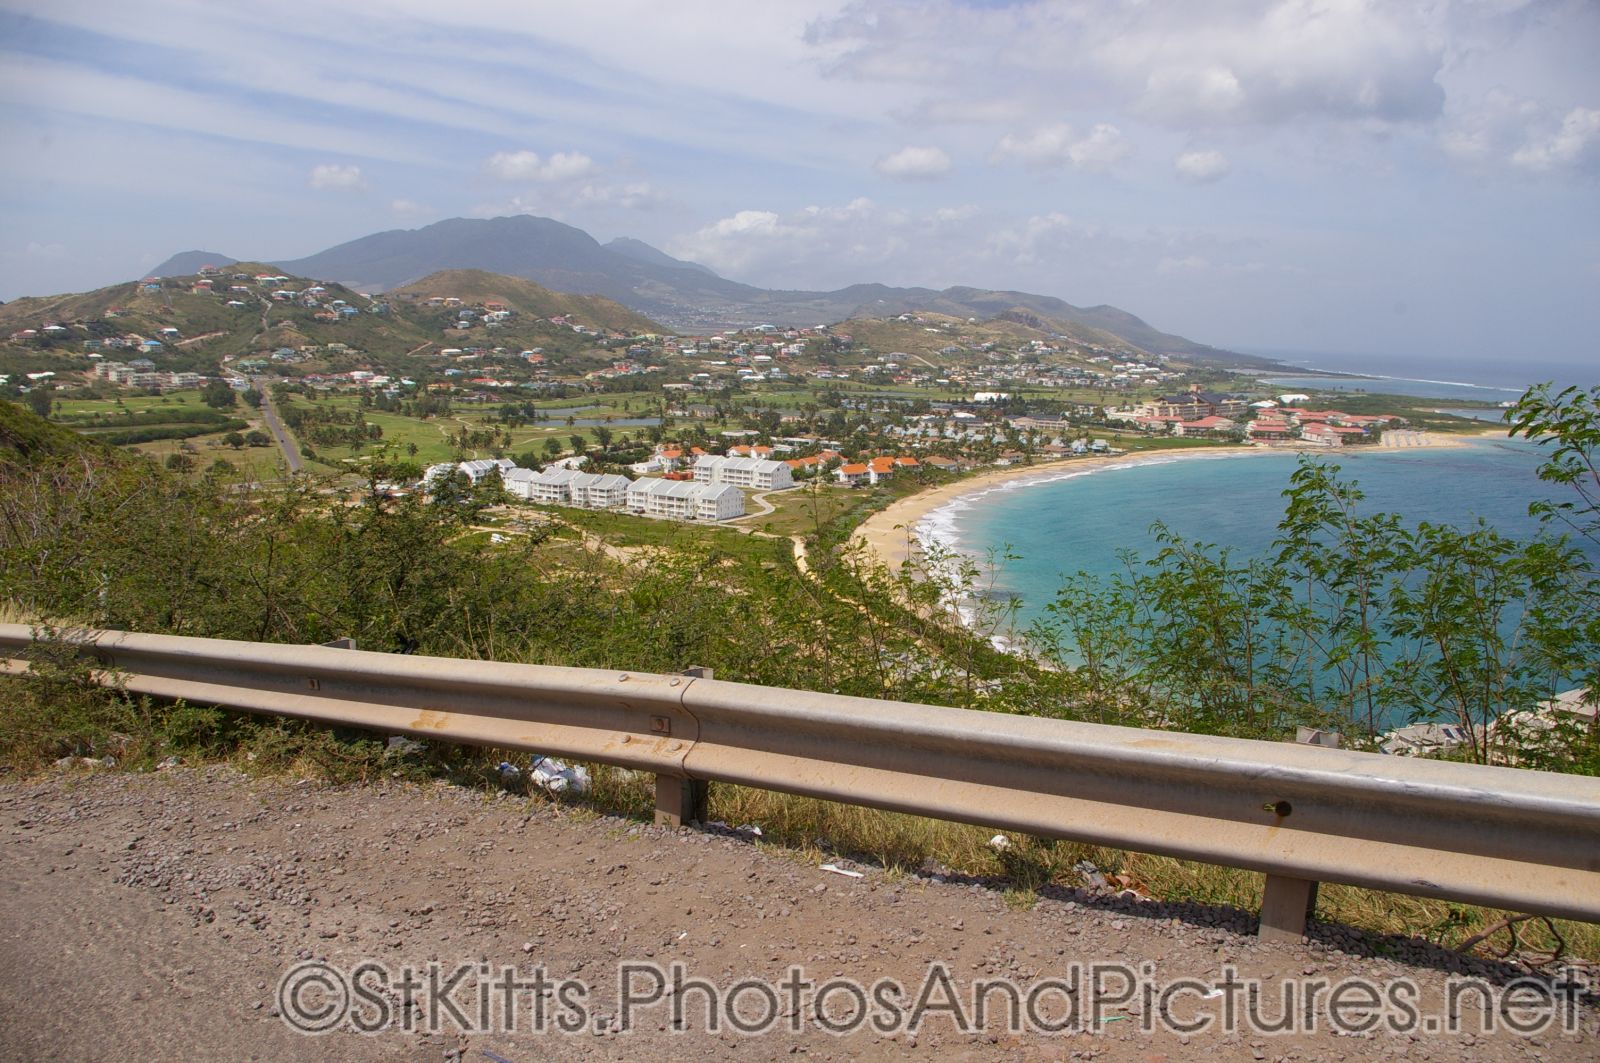 Frigate Bay as viewed from a hill side road in St Kitts.jpg
